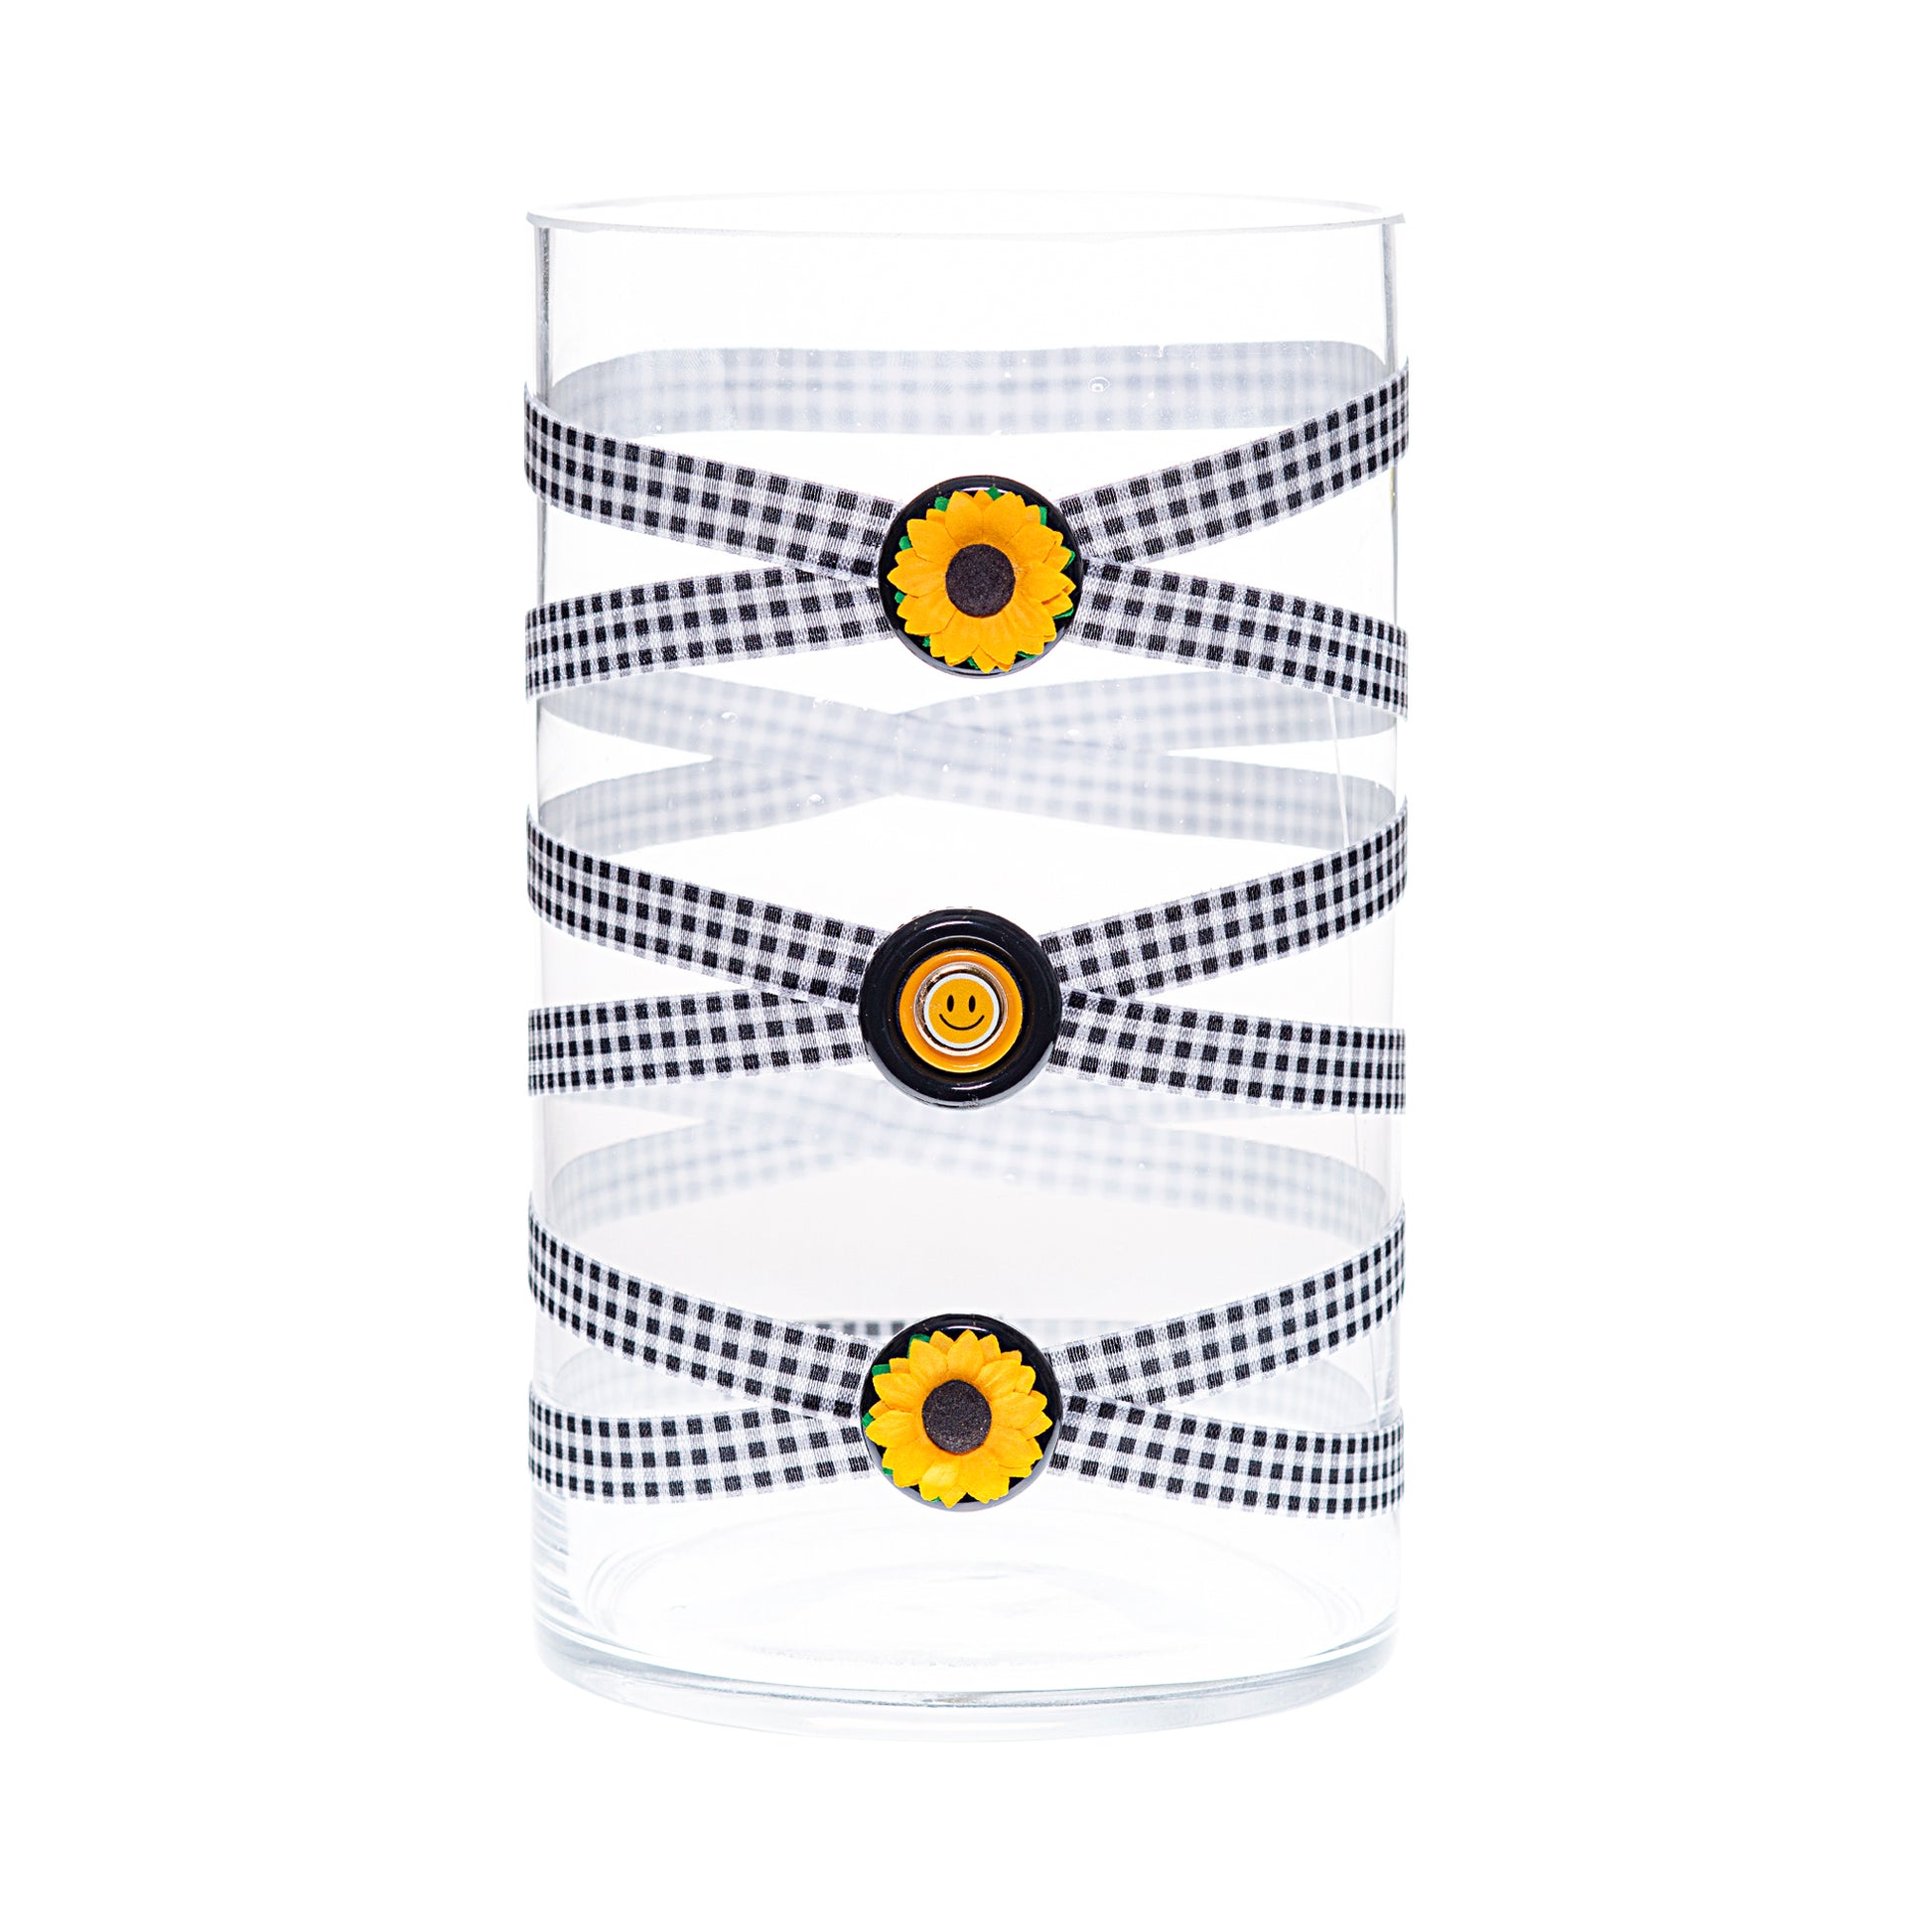 Front of Glass Wrappings 6" x 10" cylinder wrapped in black and white check elastic, decorated with  sunflowers and a yellow smiley face.